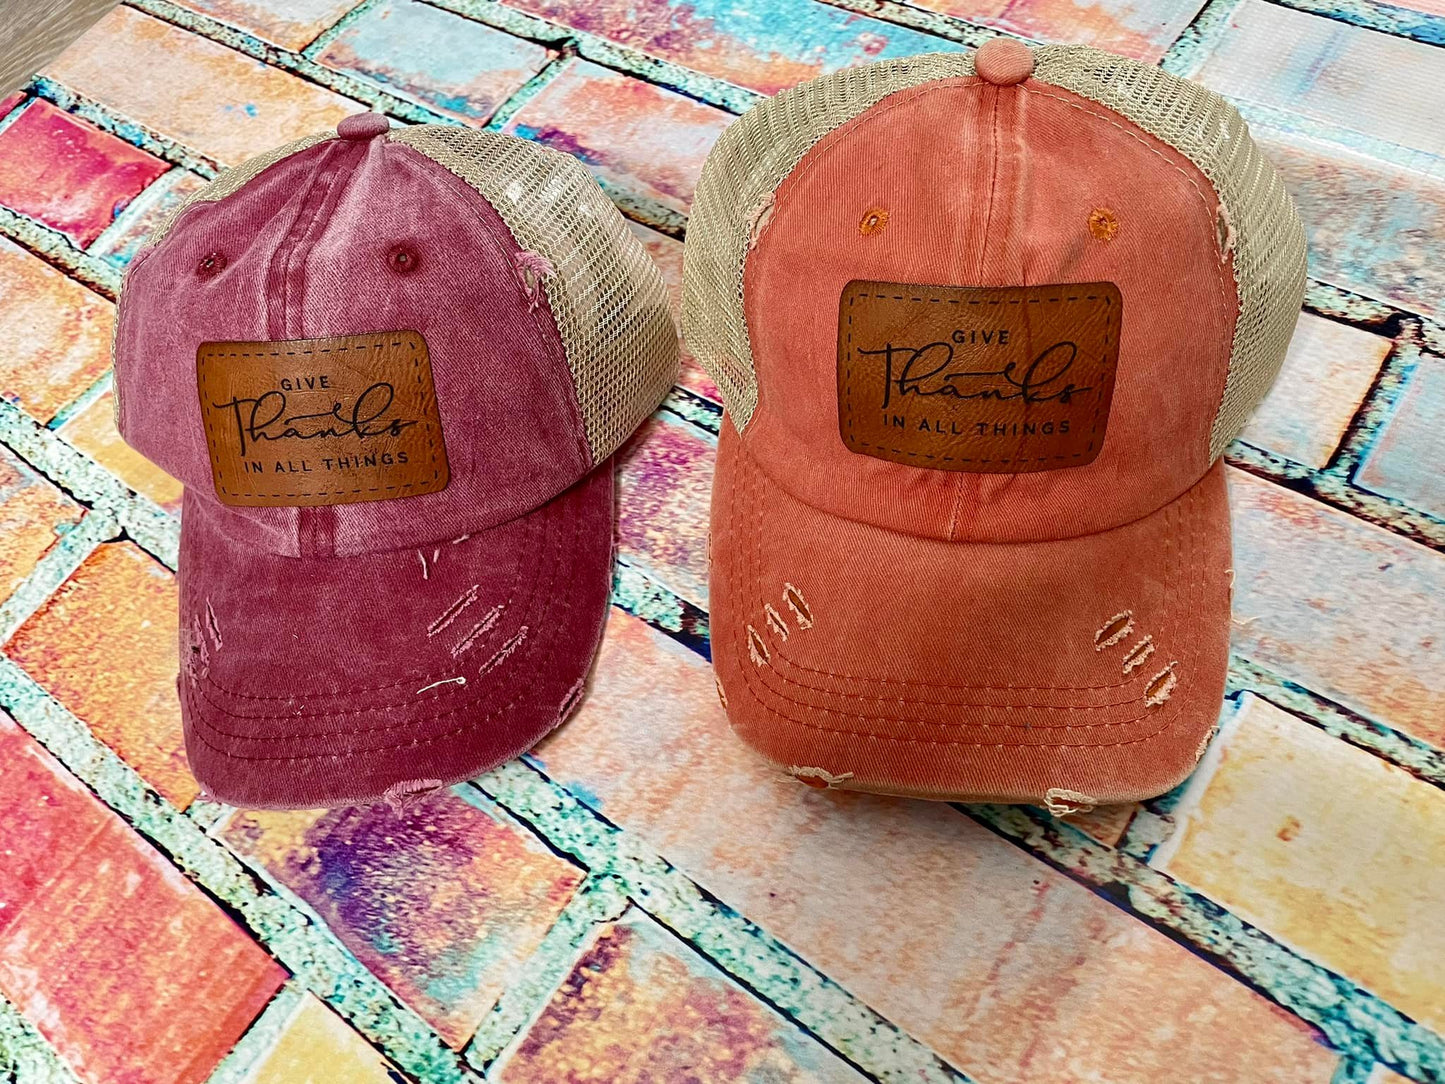 Give thank in all things hat - Wine (left) RTS